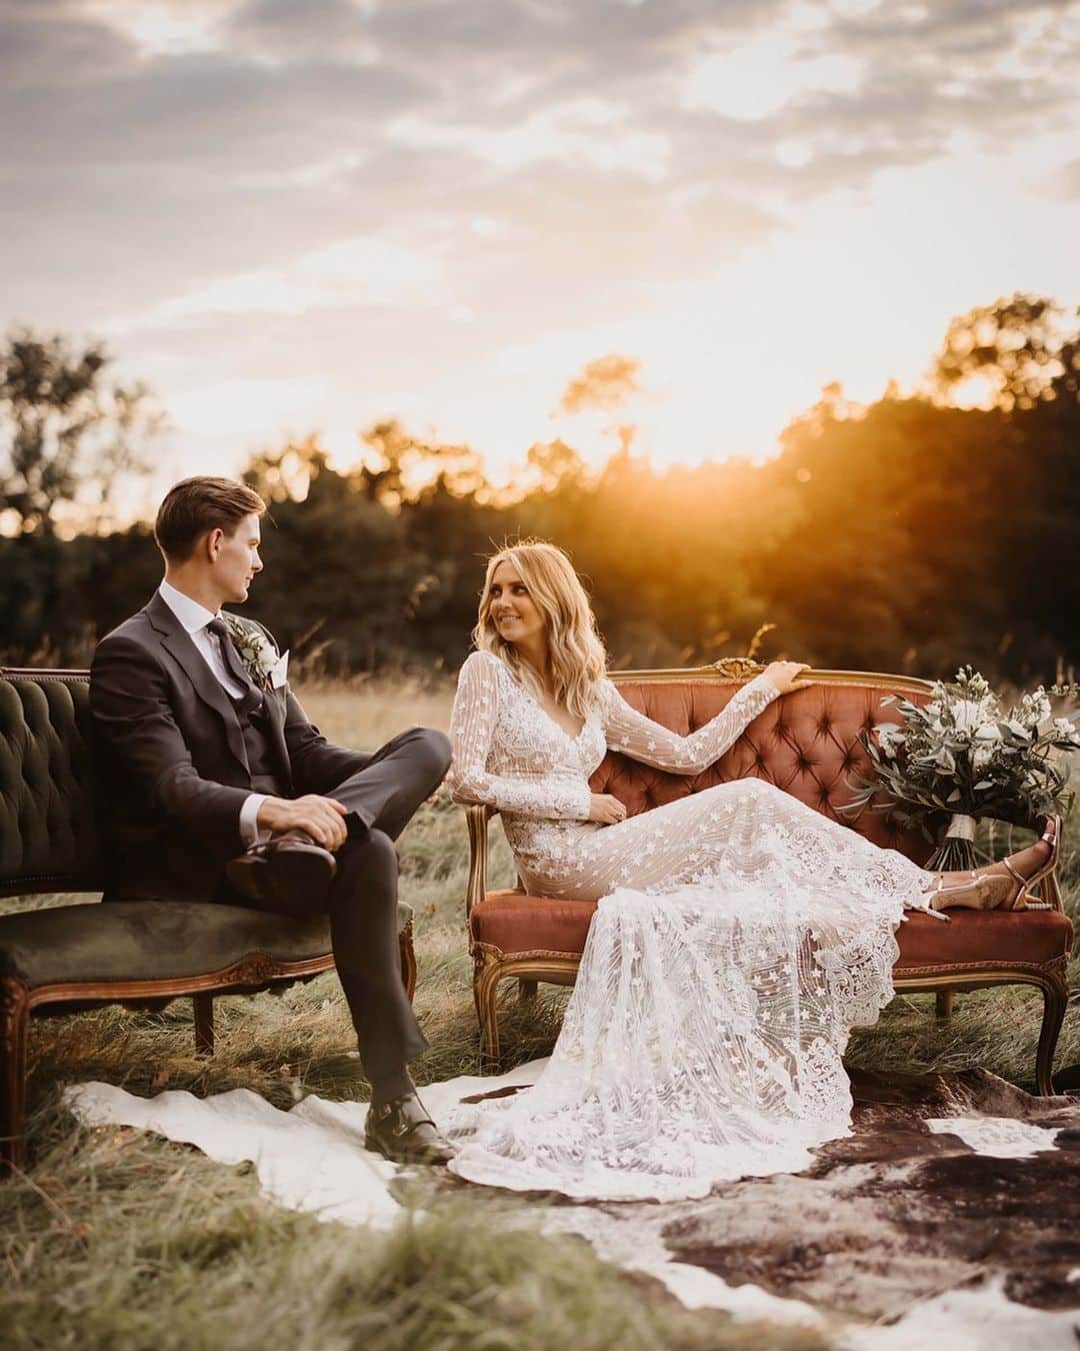 a picture of a newlywed couple sitting on a tufted sofa outdoors